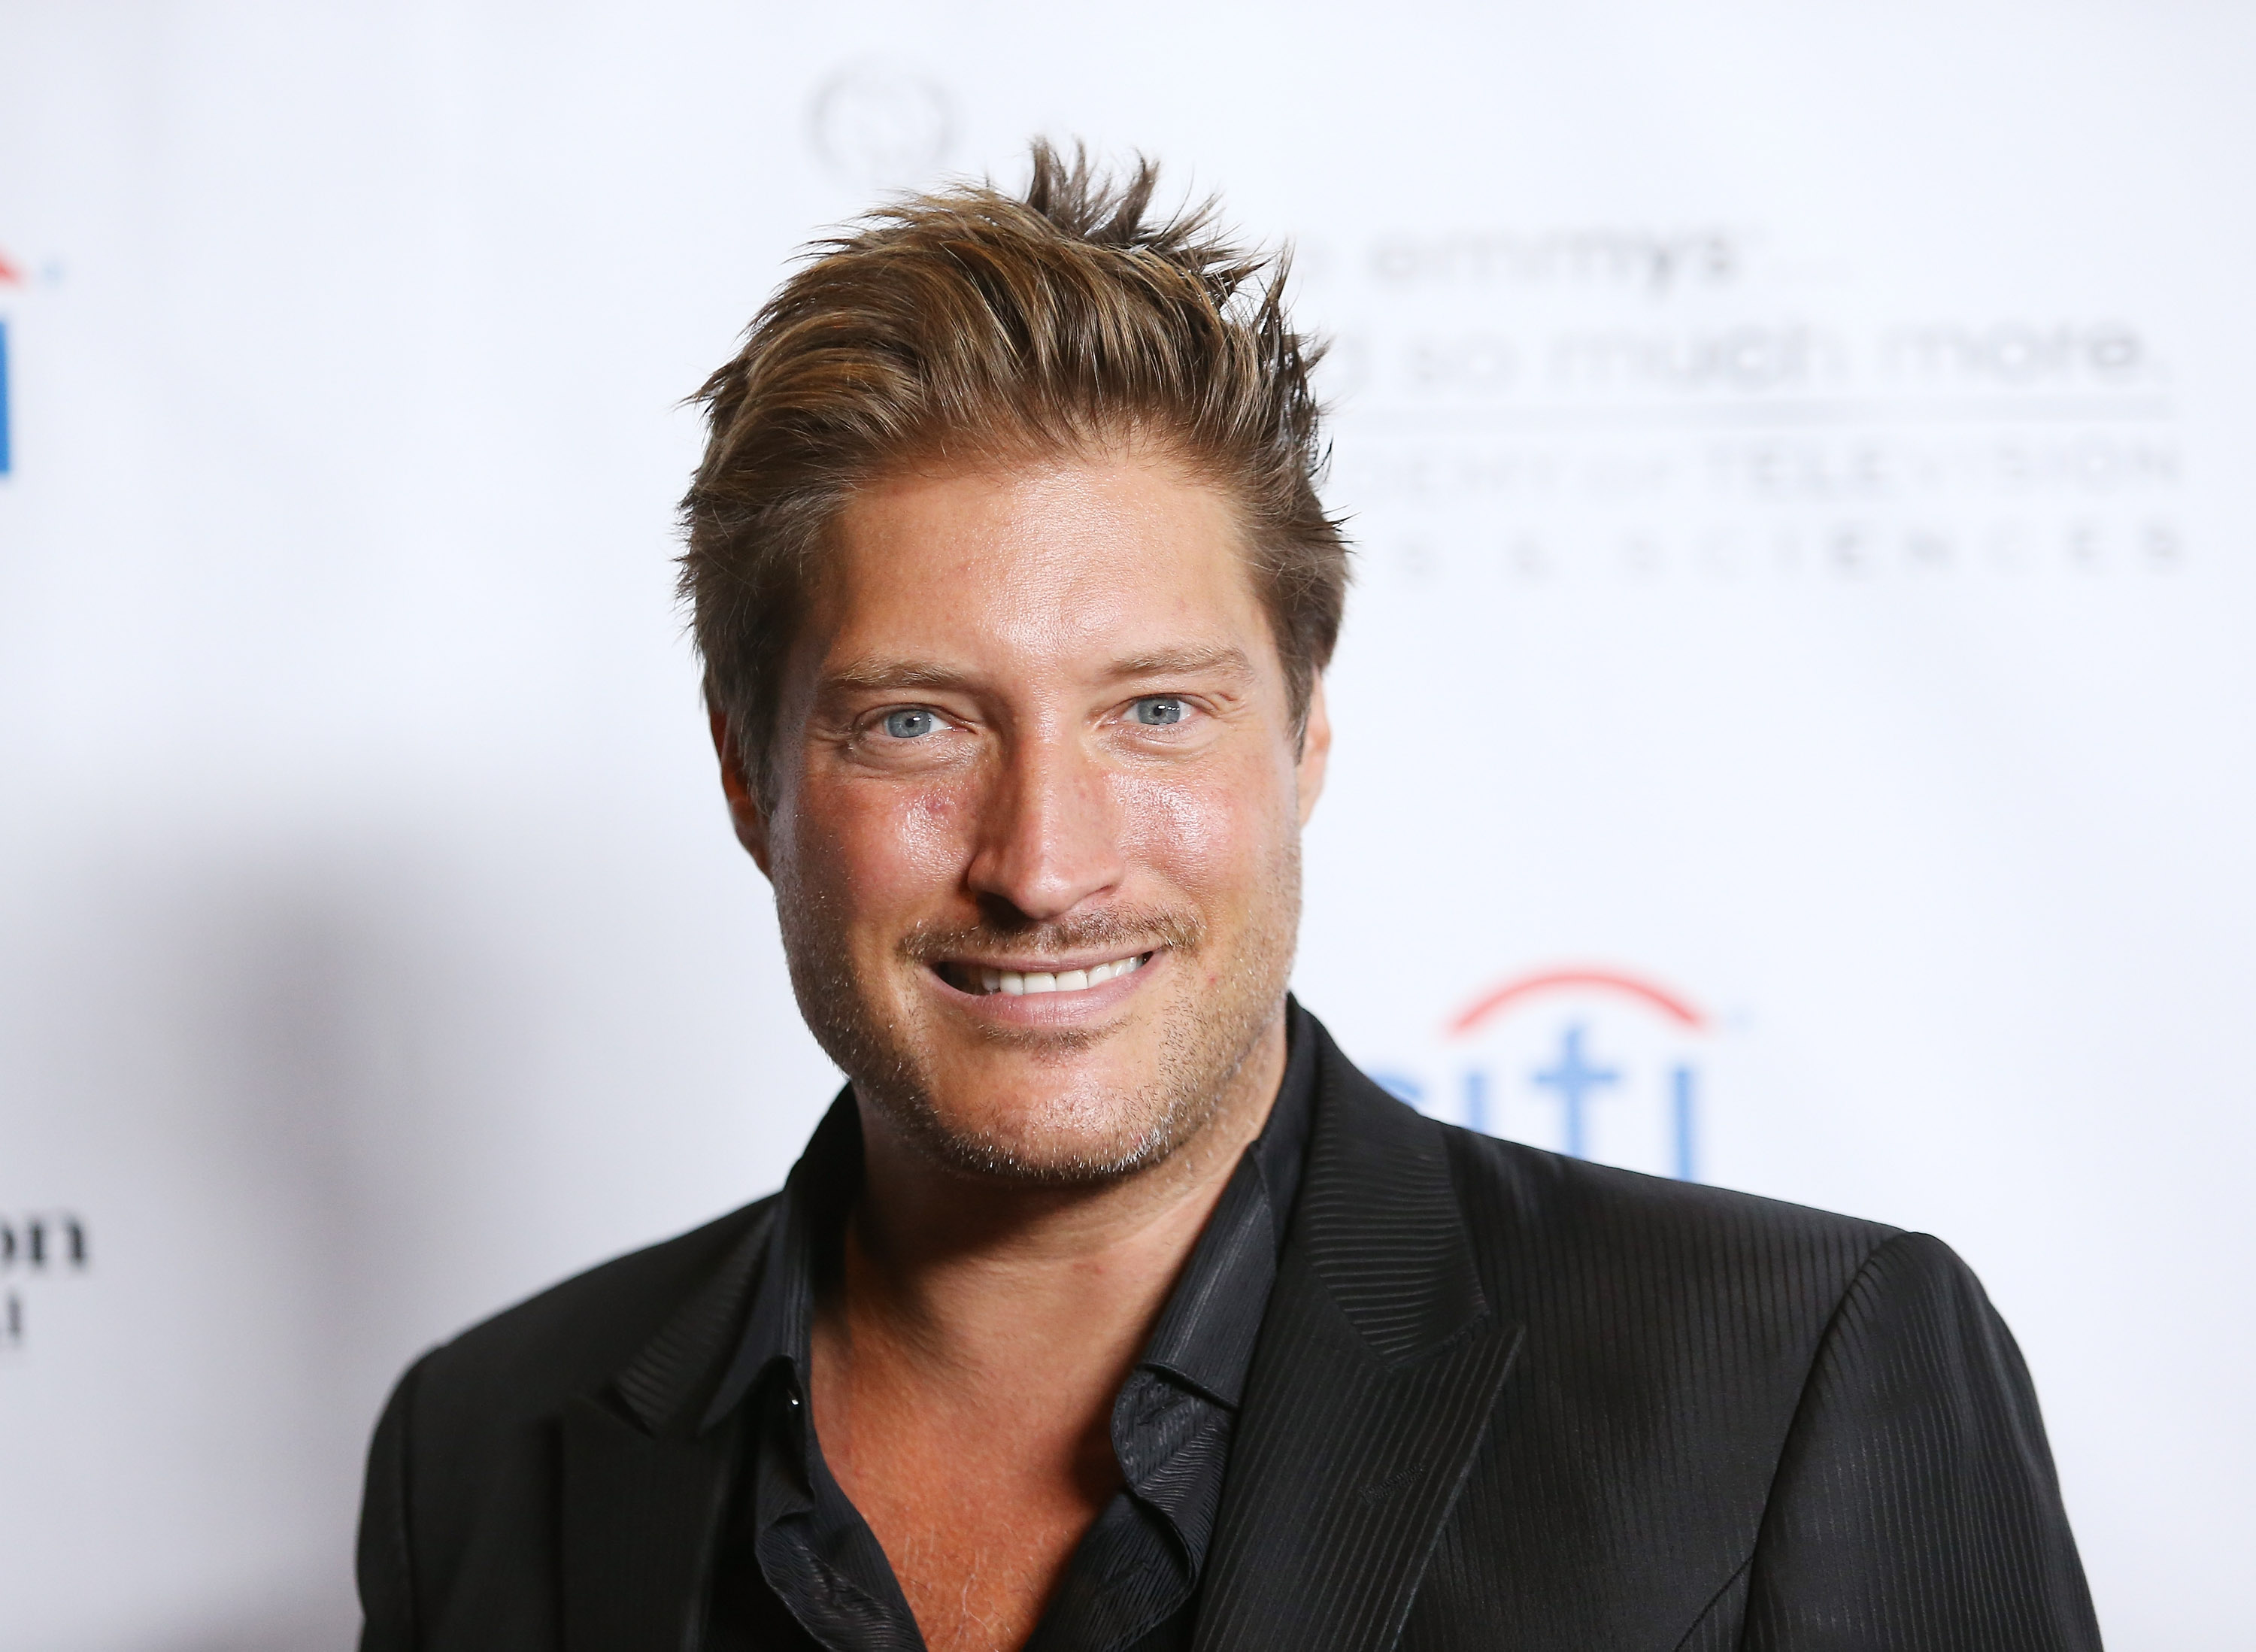 'The Bold and the Beautiful' actor Sean Kanan wearing a black suit during a red carpet appearance.